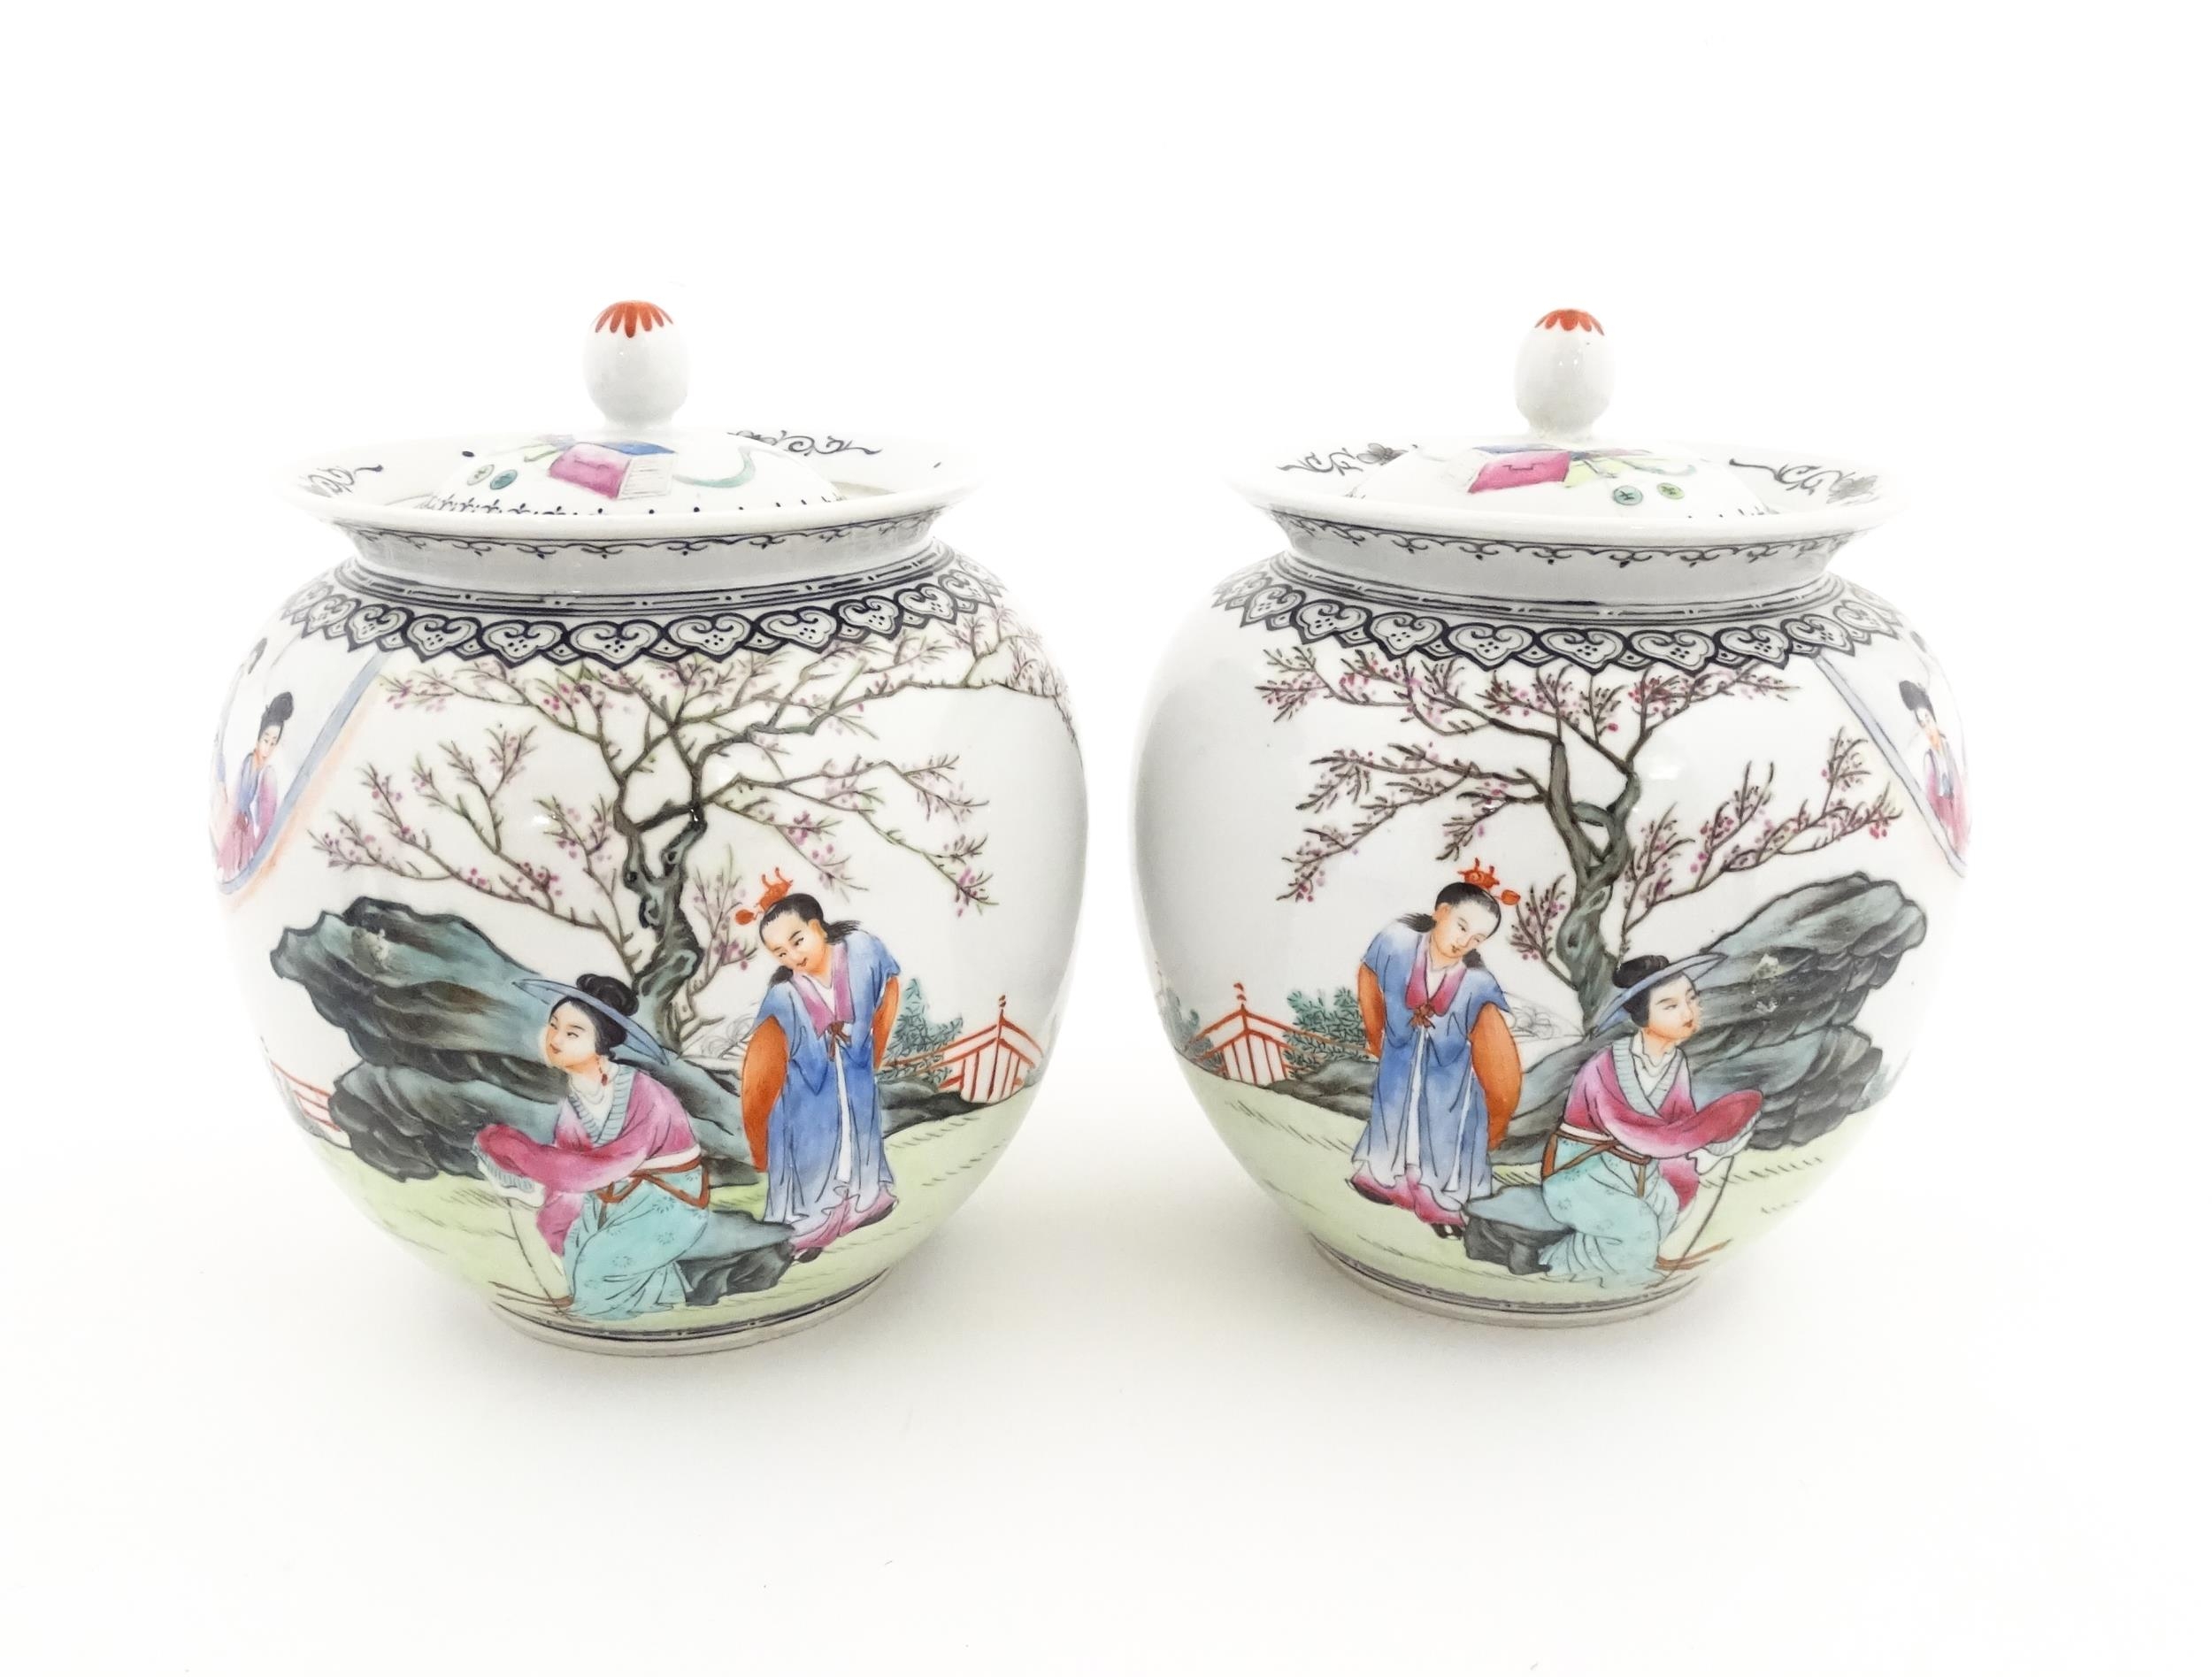 A pair of Chinese pot and cover vases decorated with ladies in a landscapes, and Character script.